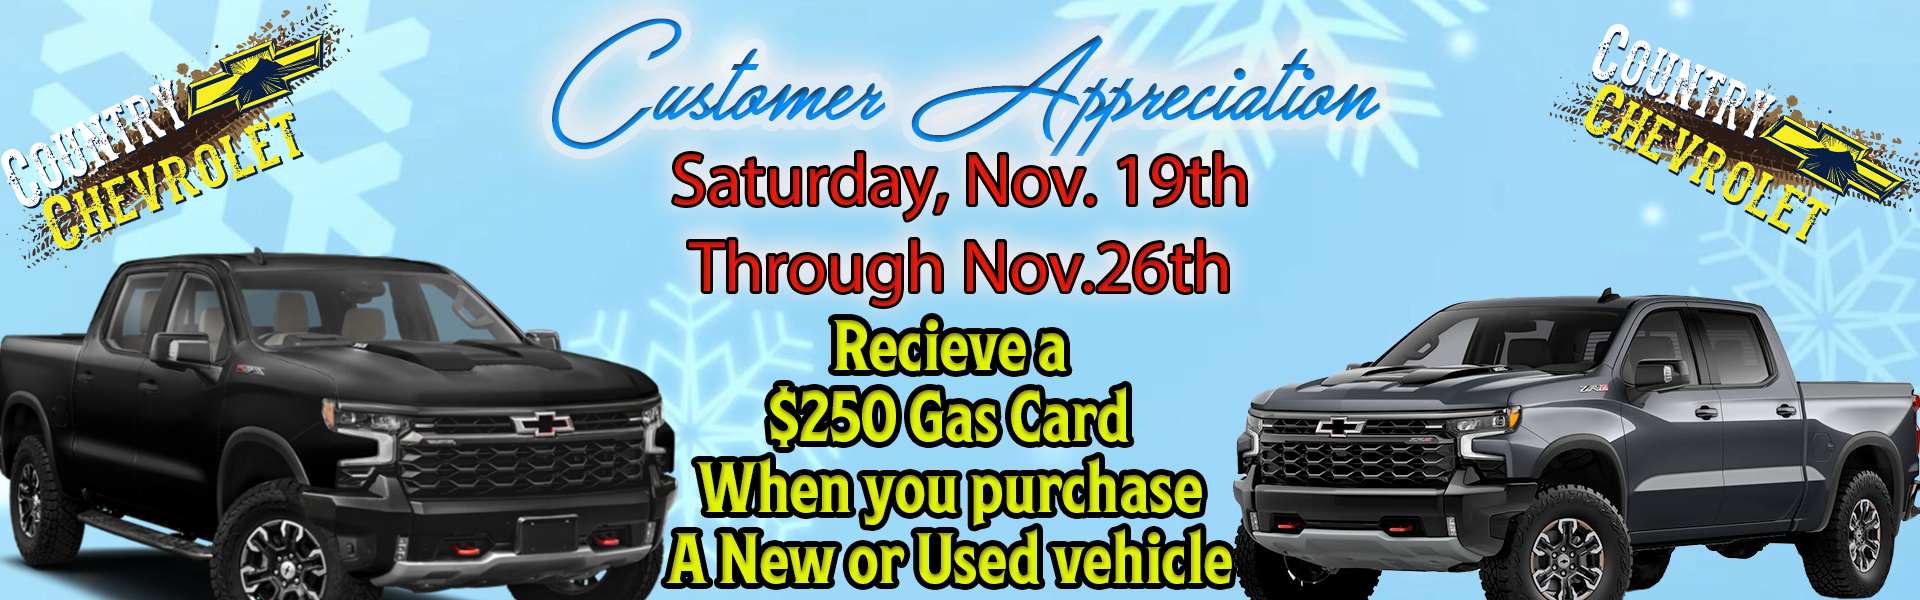 Receive a $250 Gas Card When You Purchase a New/Used Vehicle